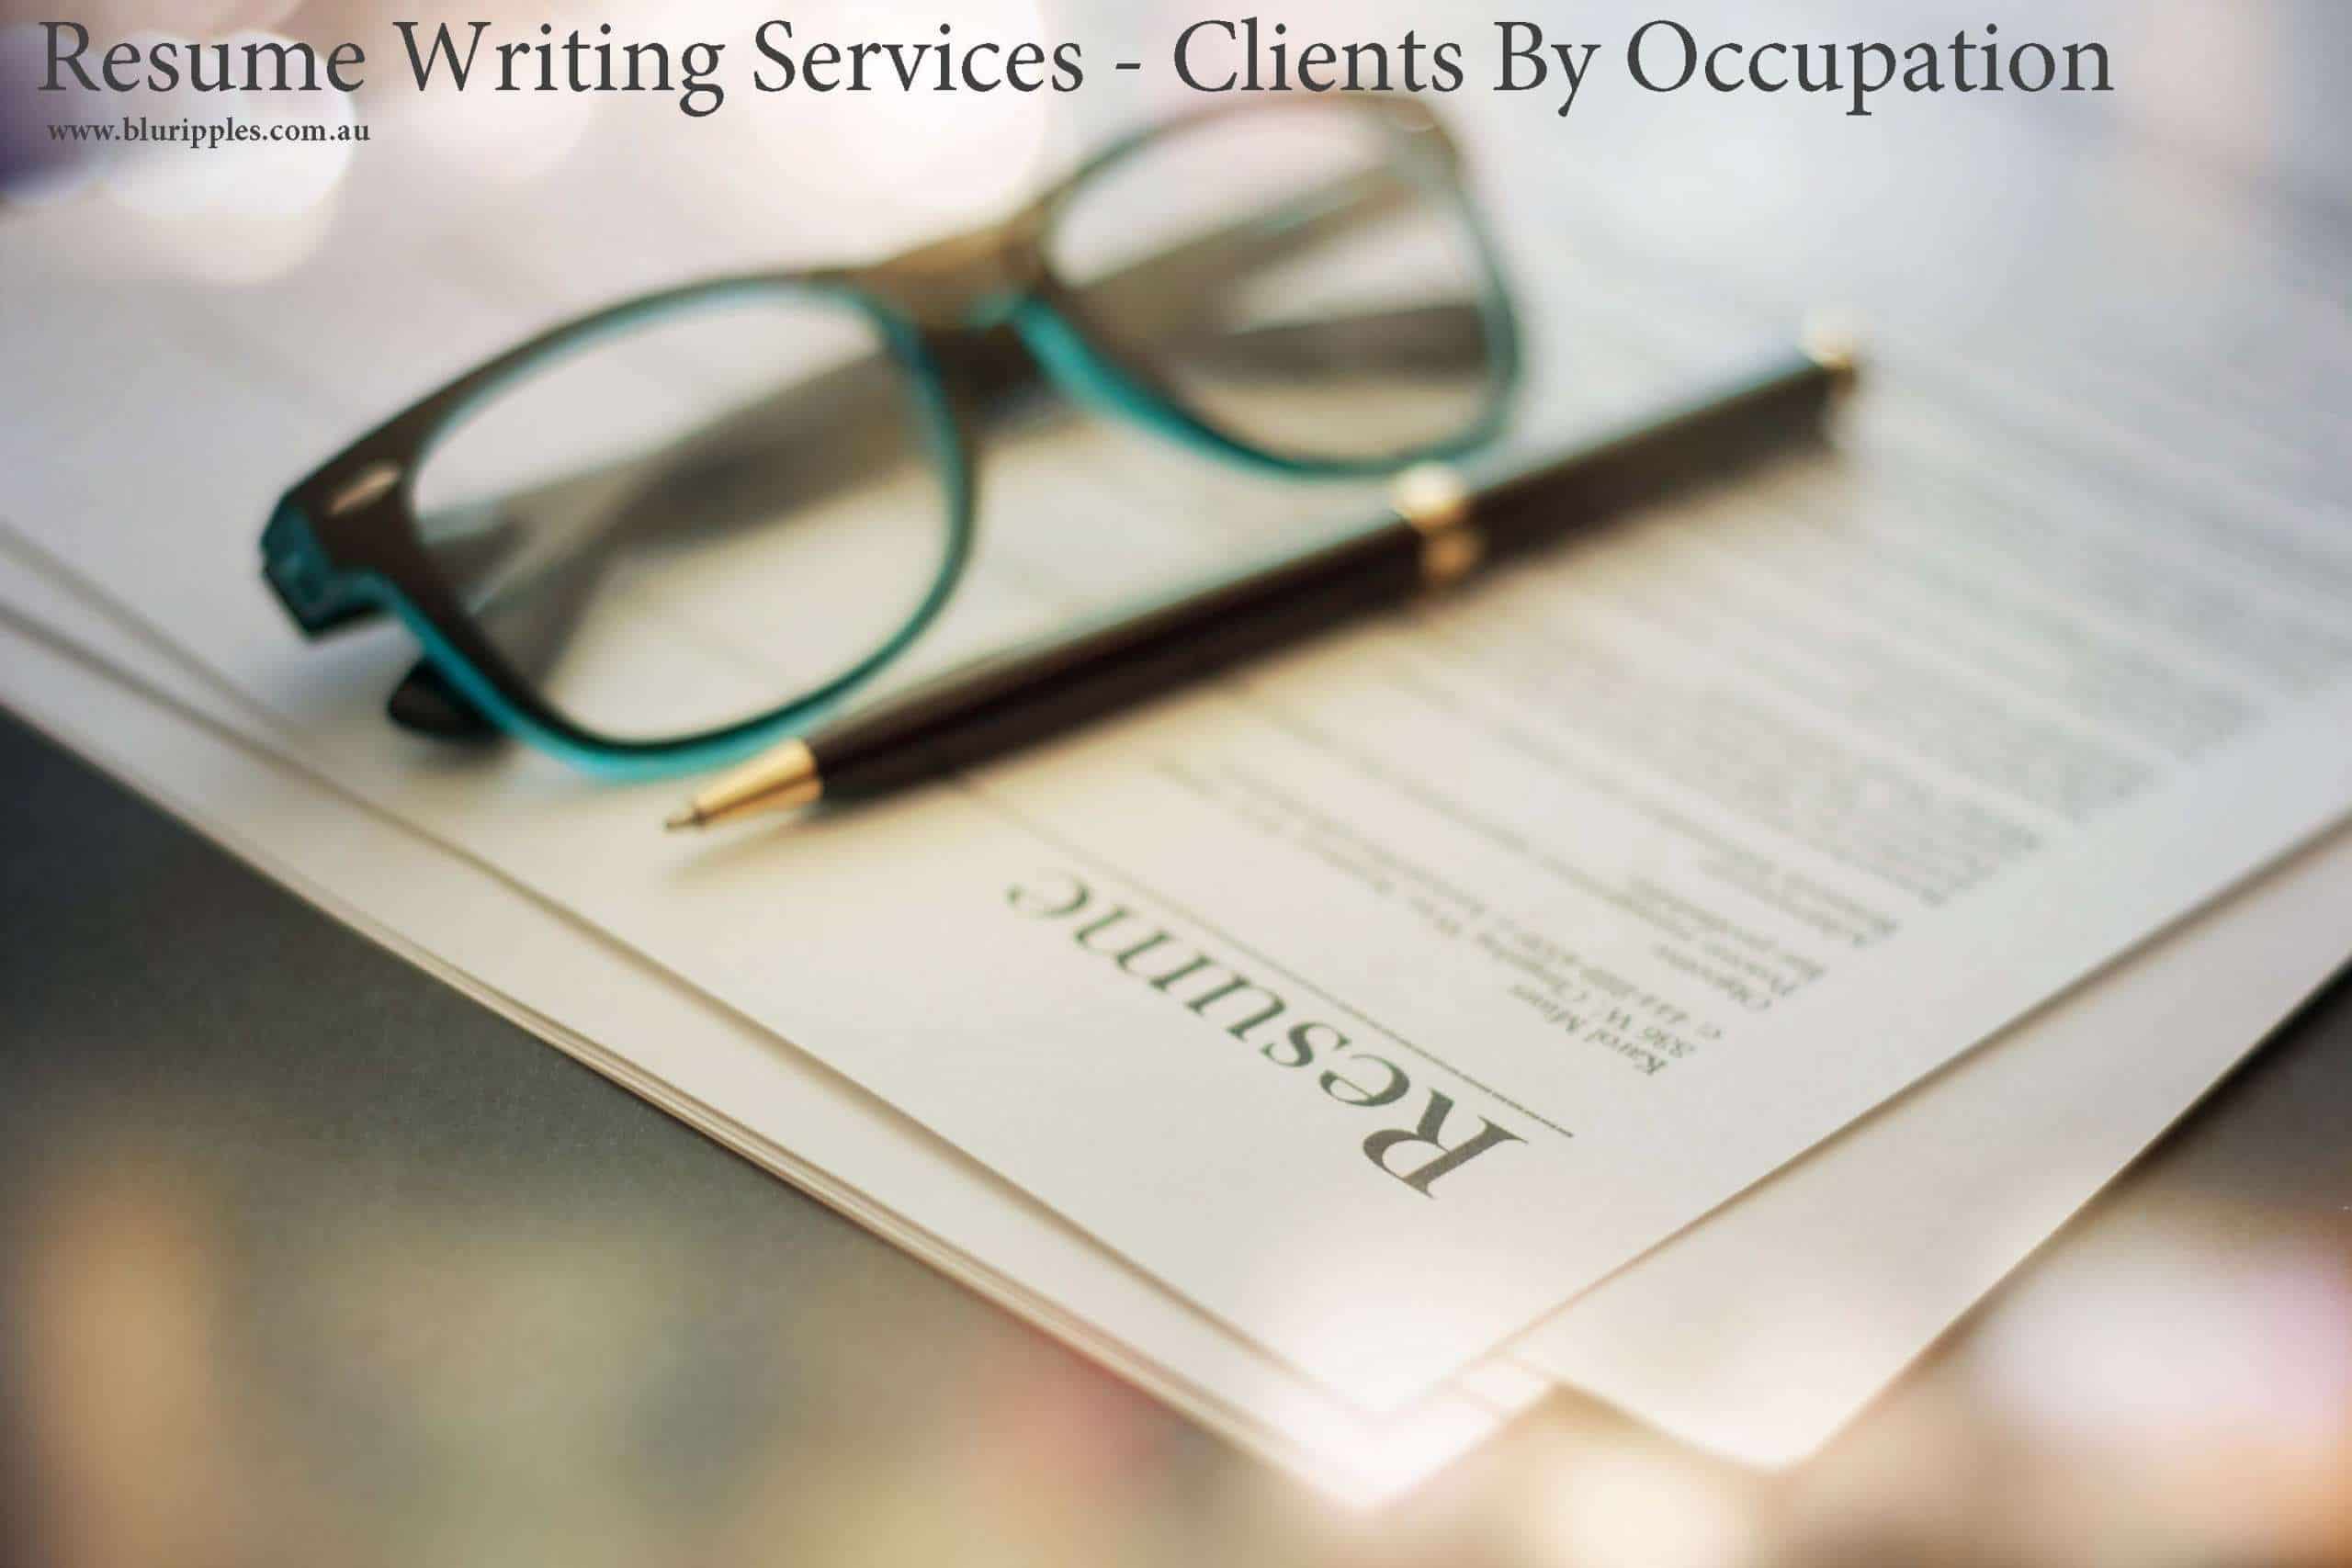 Resume Writing Services - Clients By Occupation